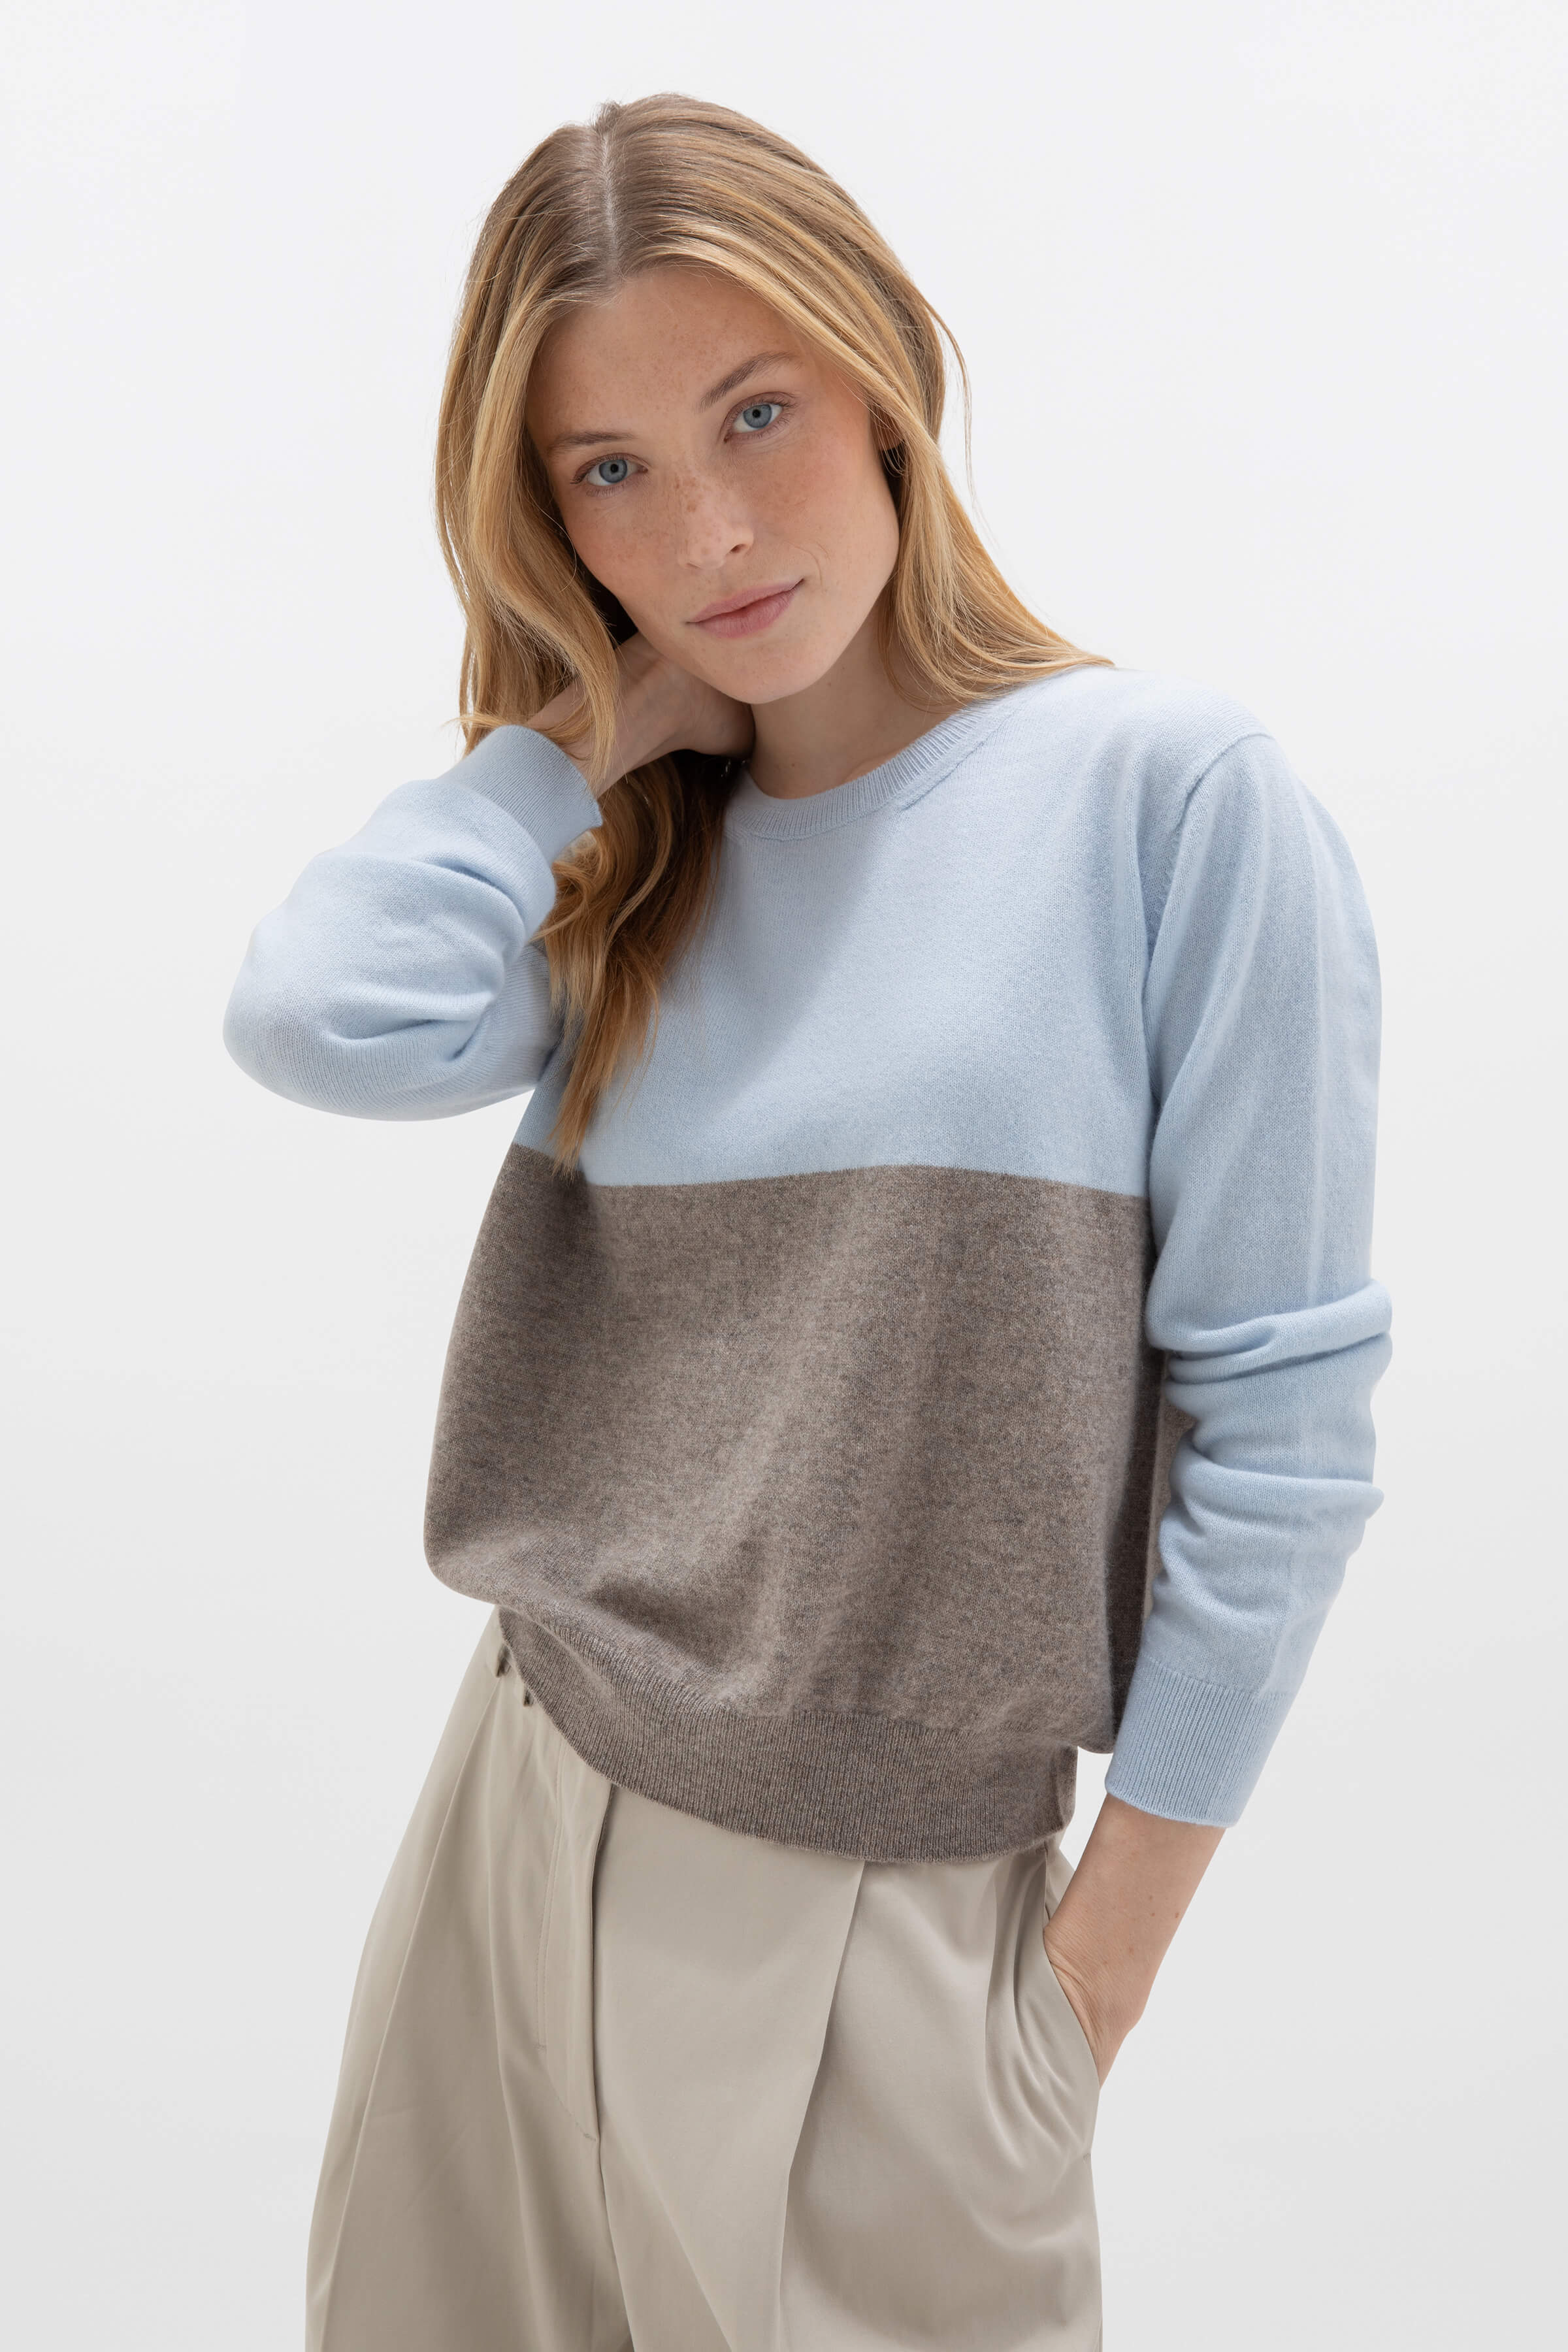 Women's Jumpers | Cashmere Knit Sweaters & Hoodies – Johnstons of 